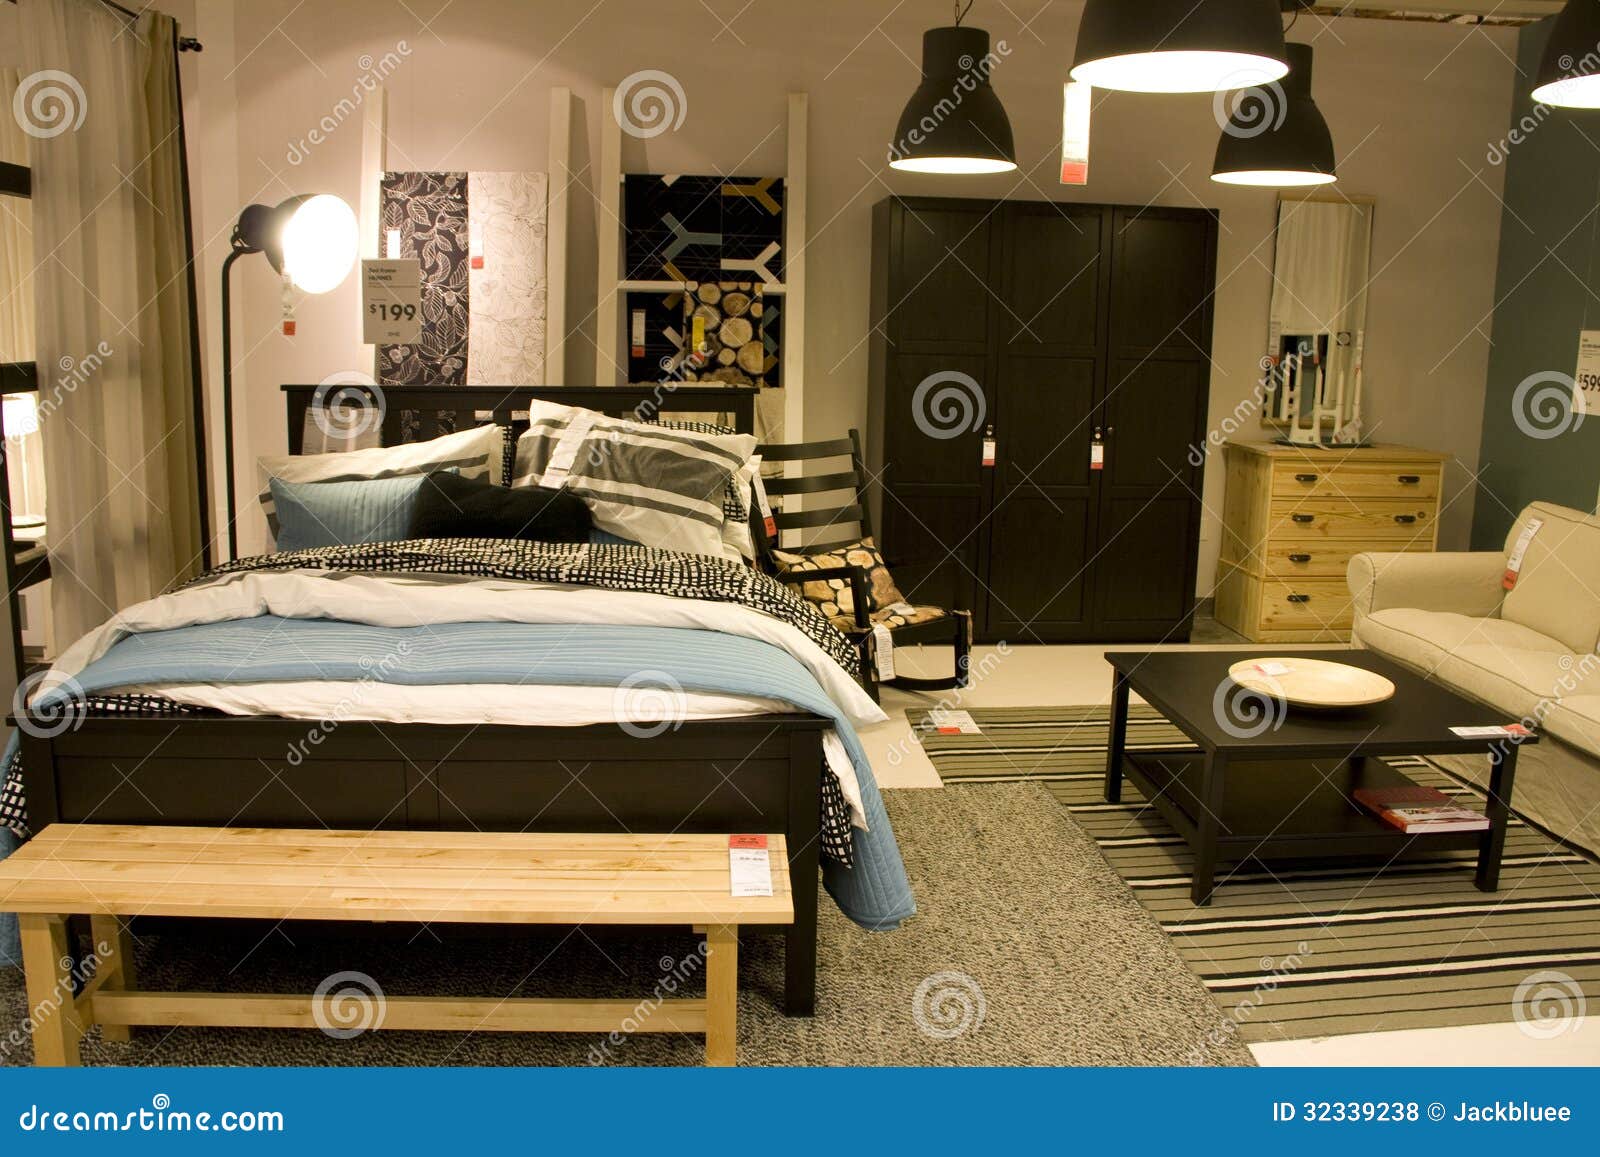 Bedroom Furniture Editorial Stock Photo Image Of Bench